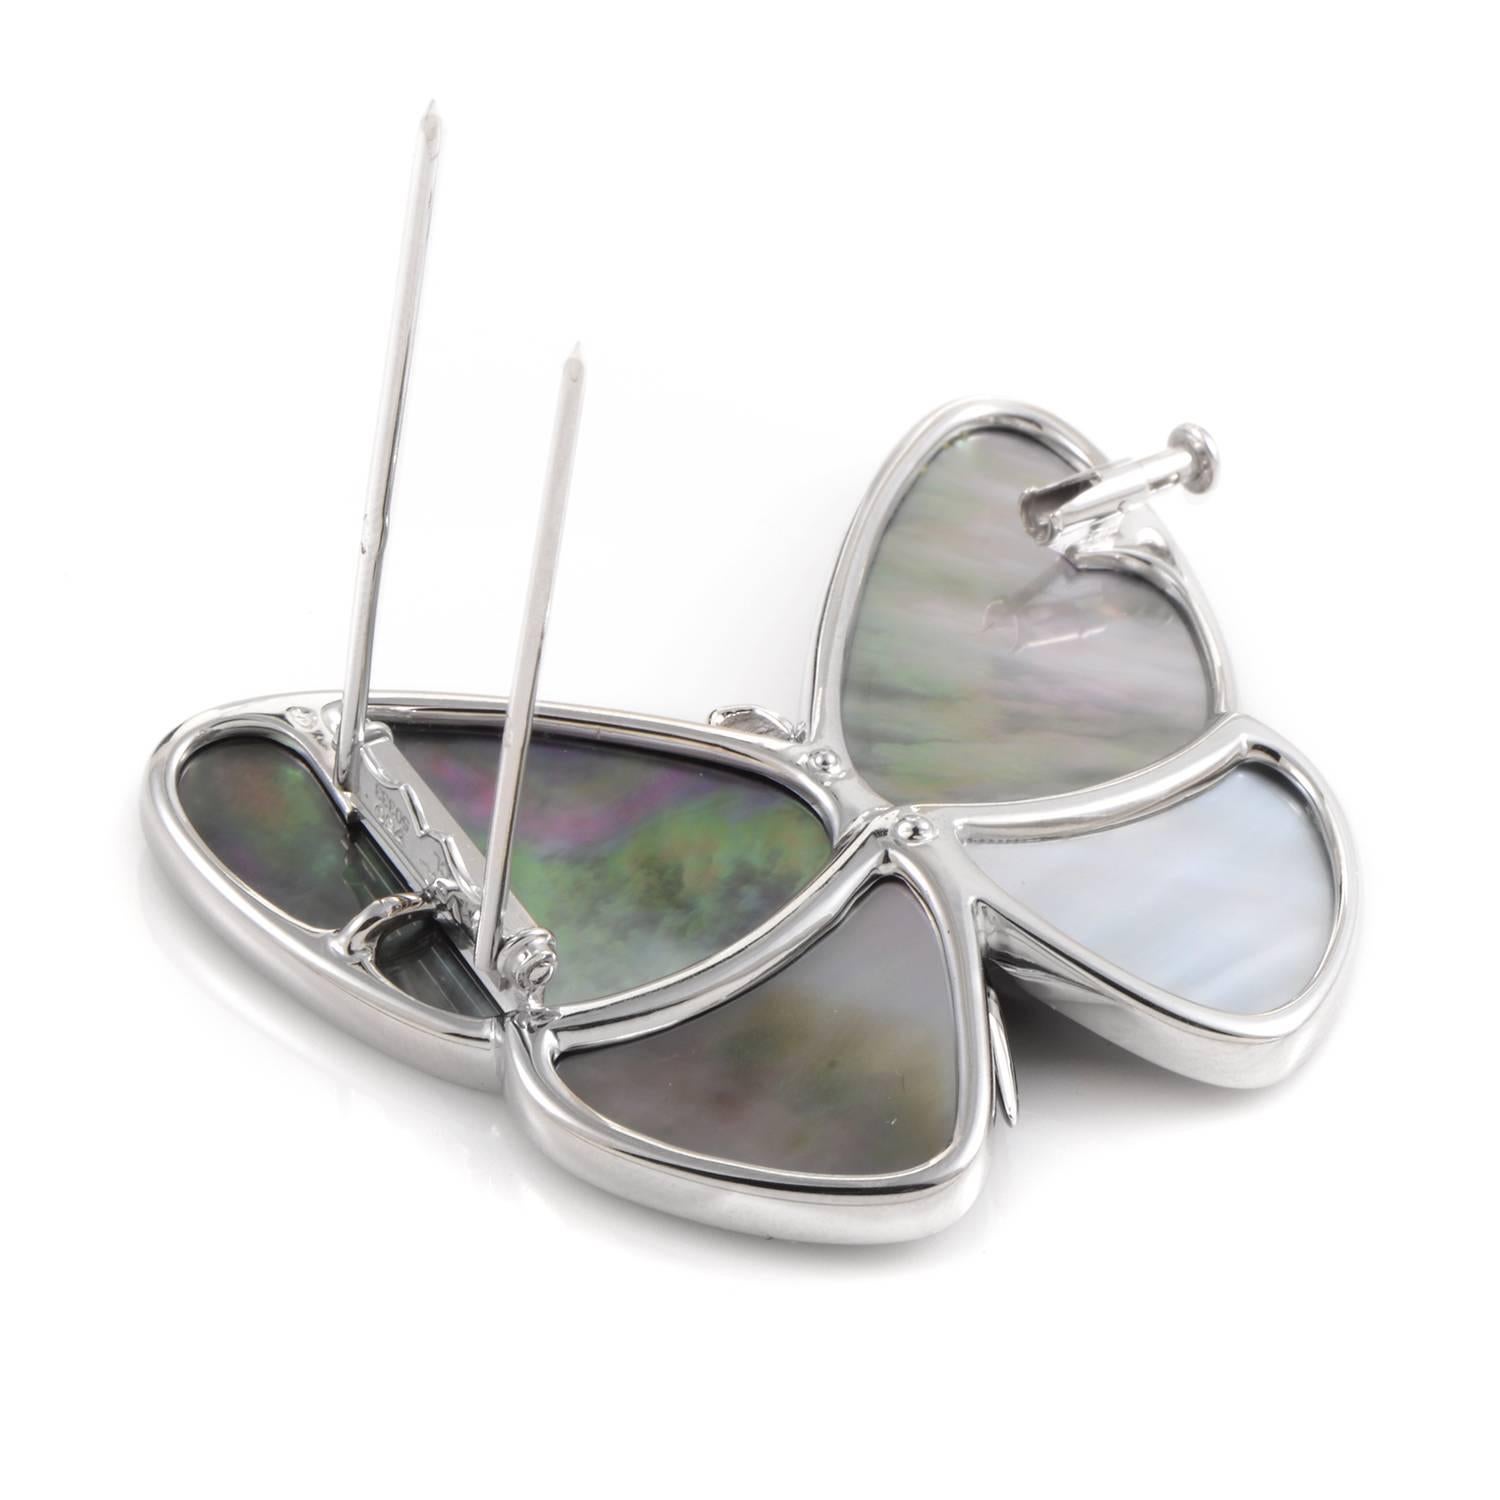 Mother of pearl wings expand their fanning magnificence on the strength of 18K white gold and the gleam of diamonds that make up the butterfly's precious body. Its bold and whimsical presence combines the inherent fragility of a butterfly with the